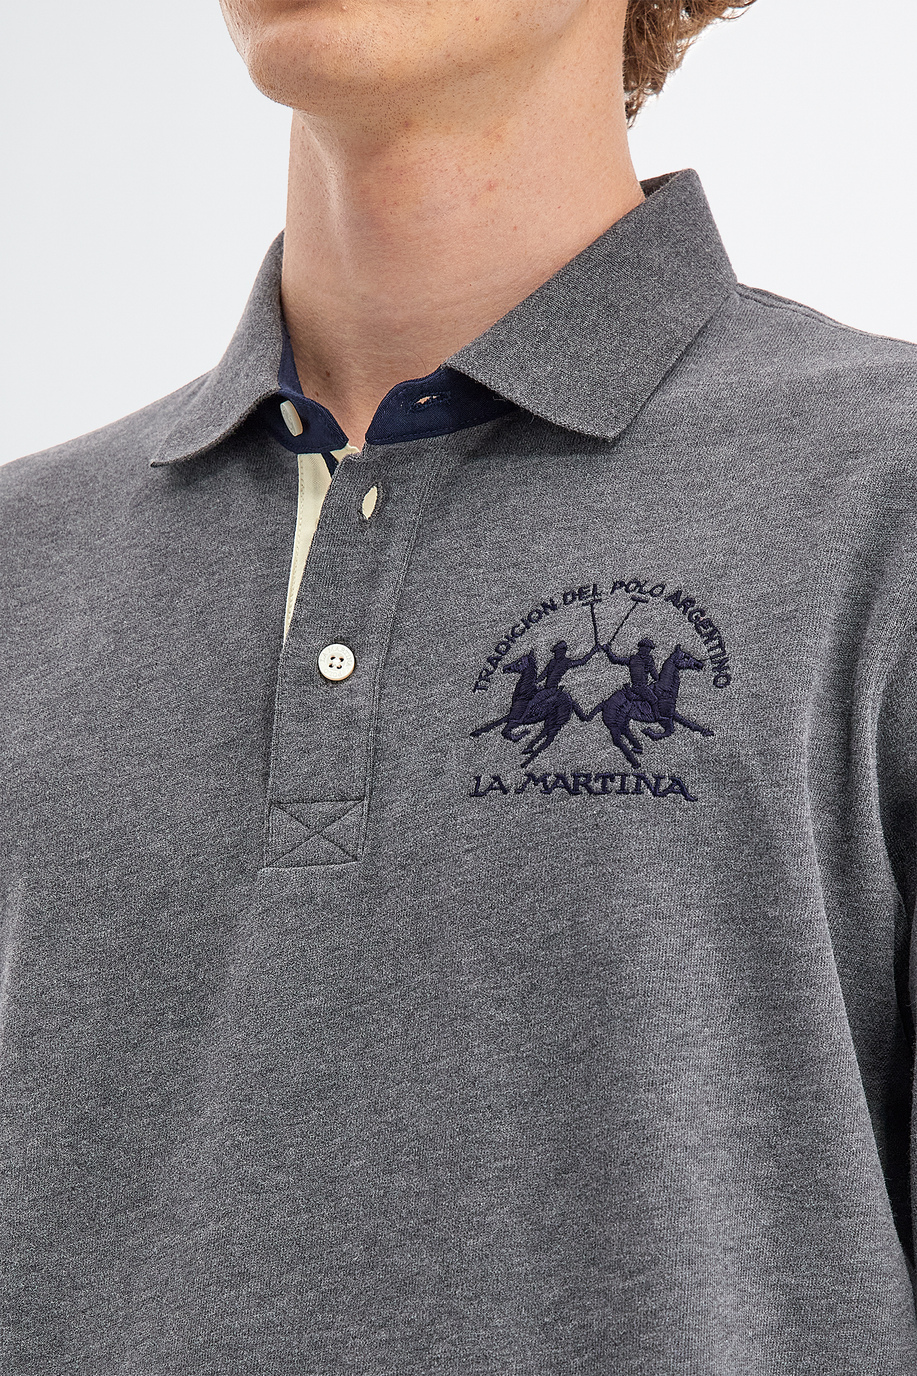 Men’s polo shirt in cotton jersey long sleeves slim fit - -30% | step 3 | US | La Martina - Official Online Shop